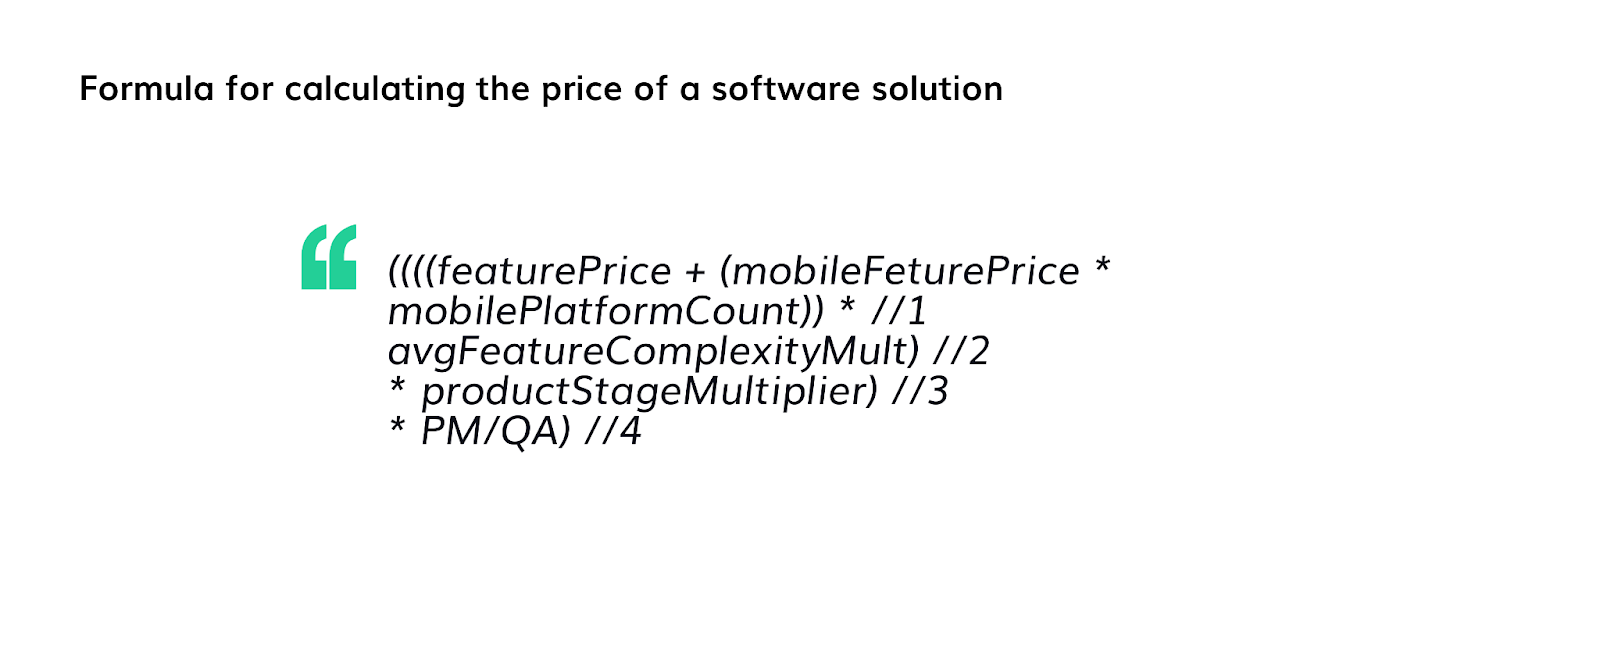 To calculate the cost of custom software development, the Flutter-based calculator assesses several parameters, including the number of supported platforms, project stage, and software feature complexity.